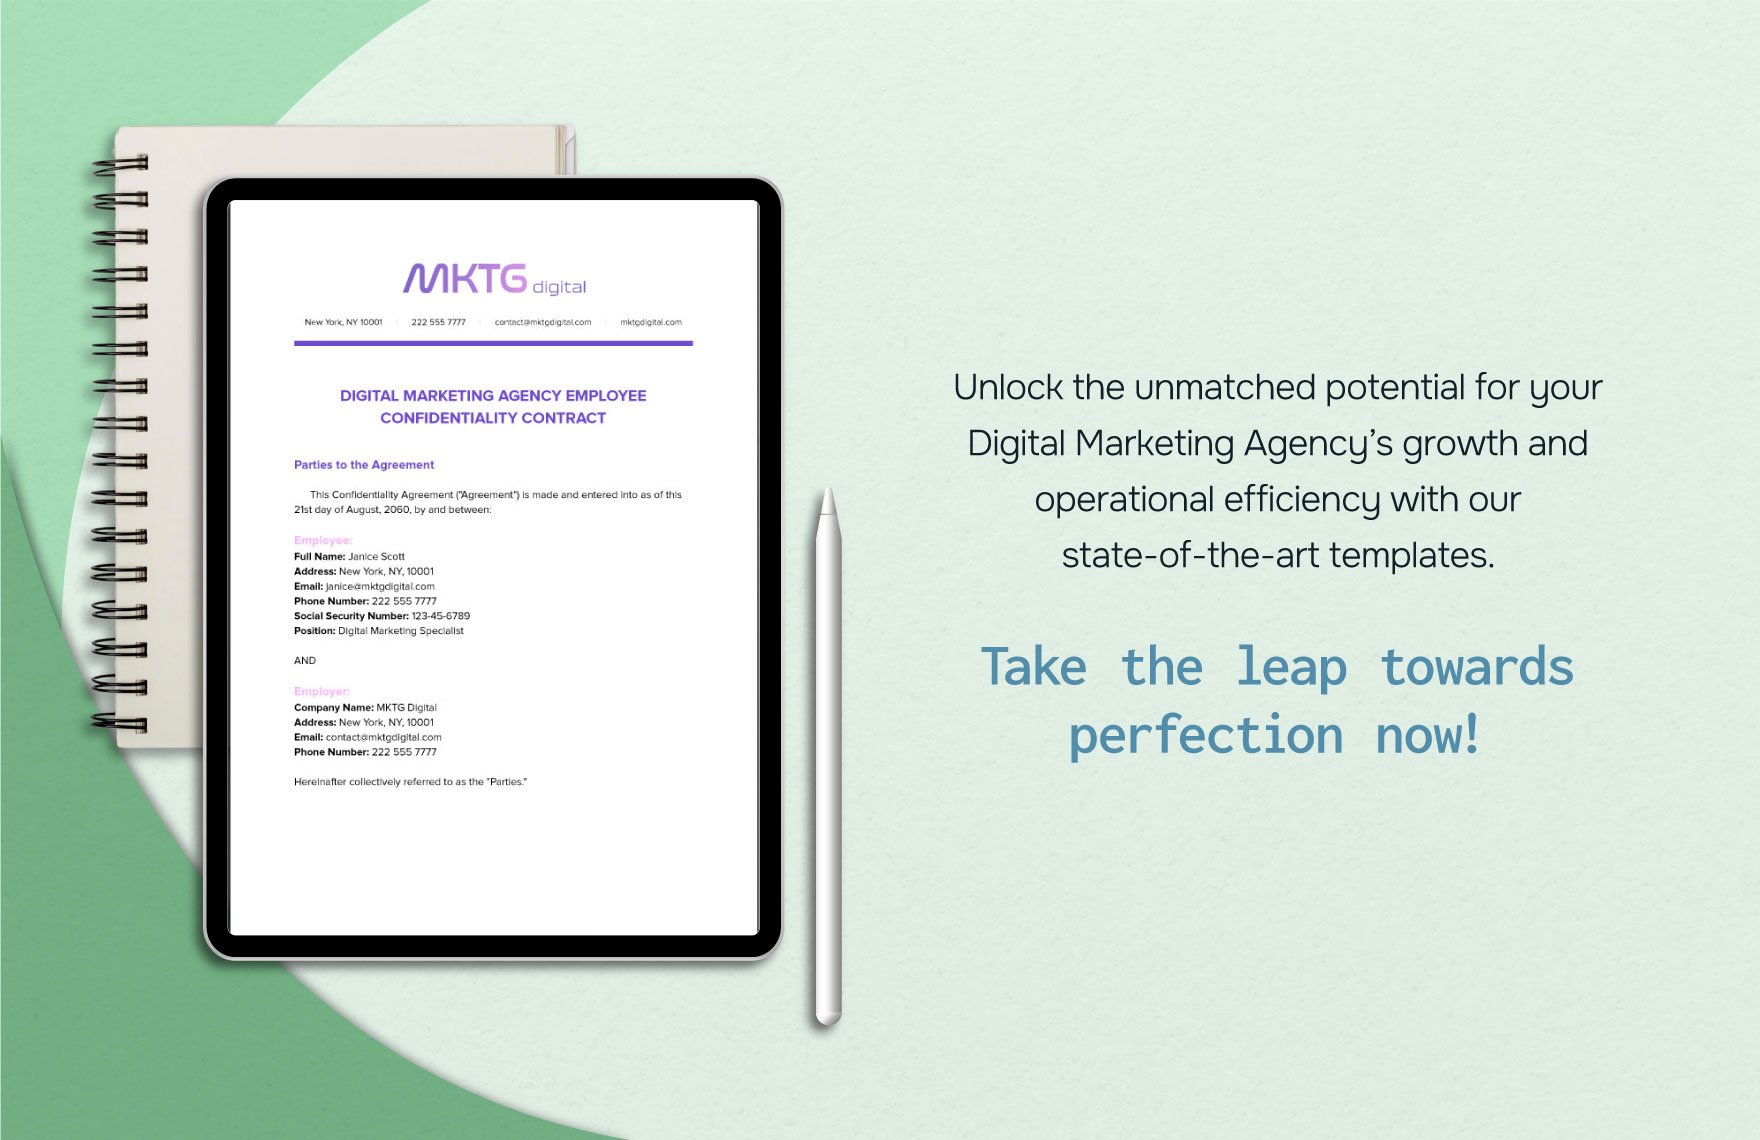 Digital Marketing Agency Employee Confidentiality Contract HR Template